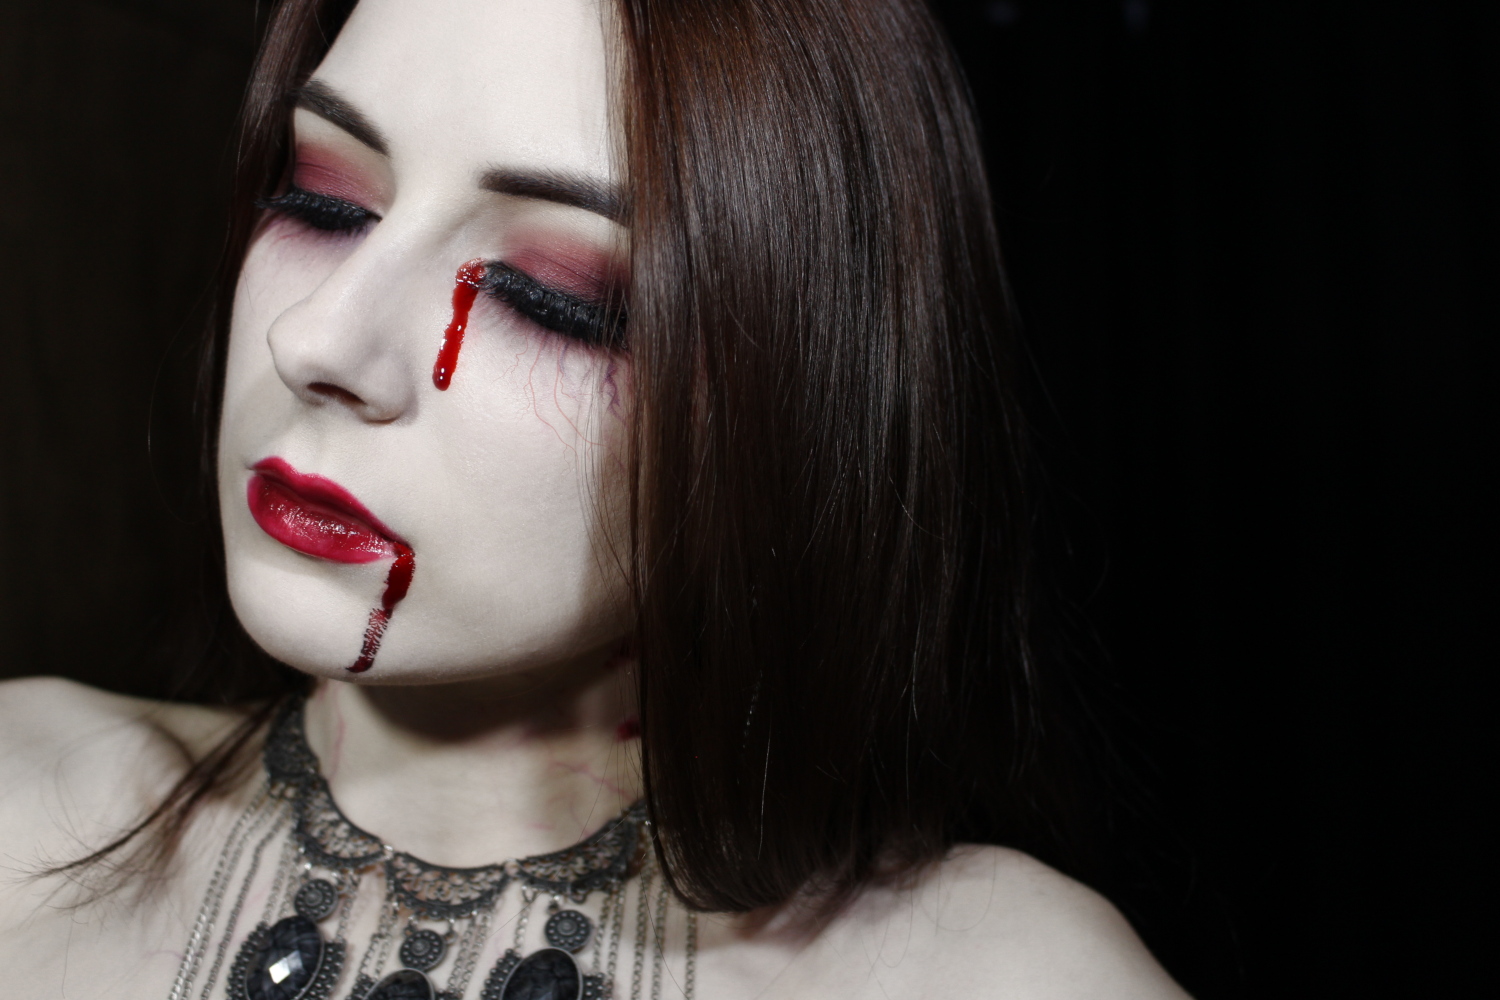 a close-up of Liz Breygel's face with a dramatic vampire makeup look and false blood tears for Halloween.